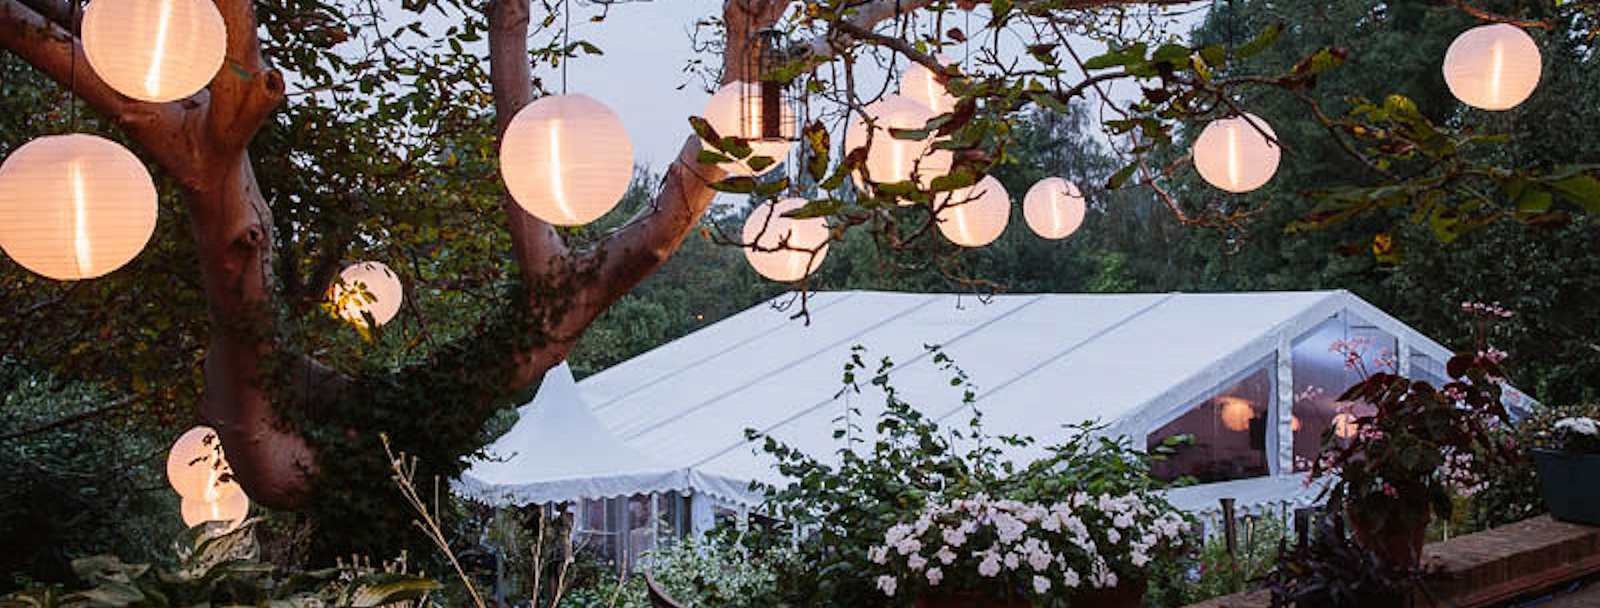 marquee roof and paper lanterns